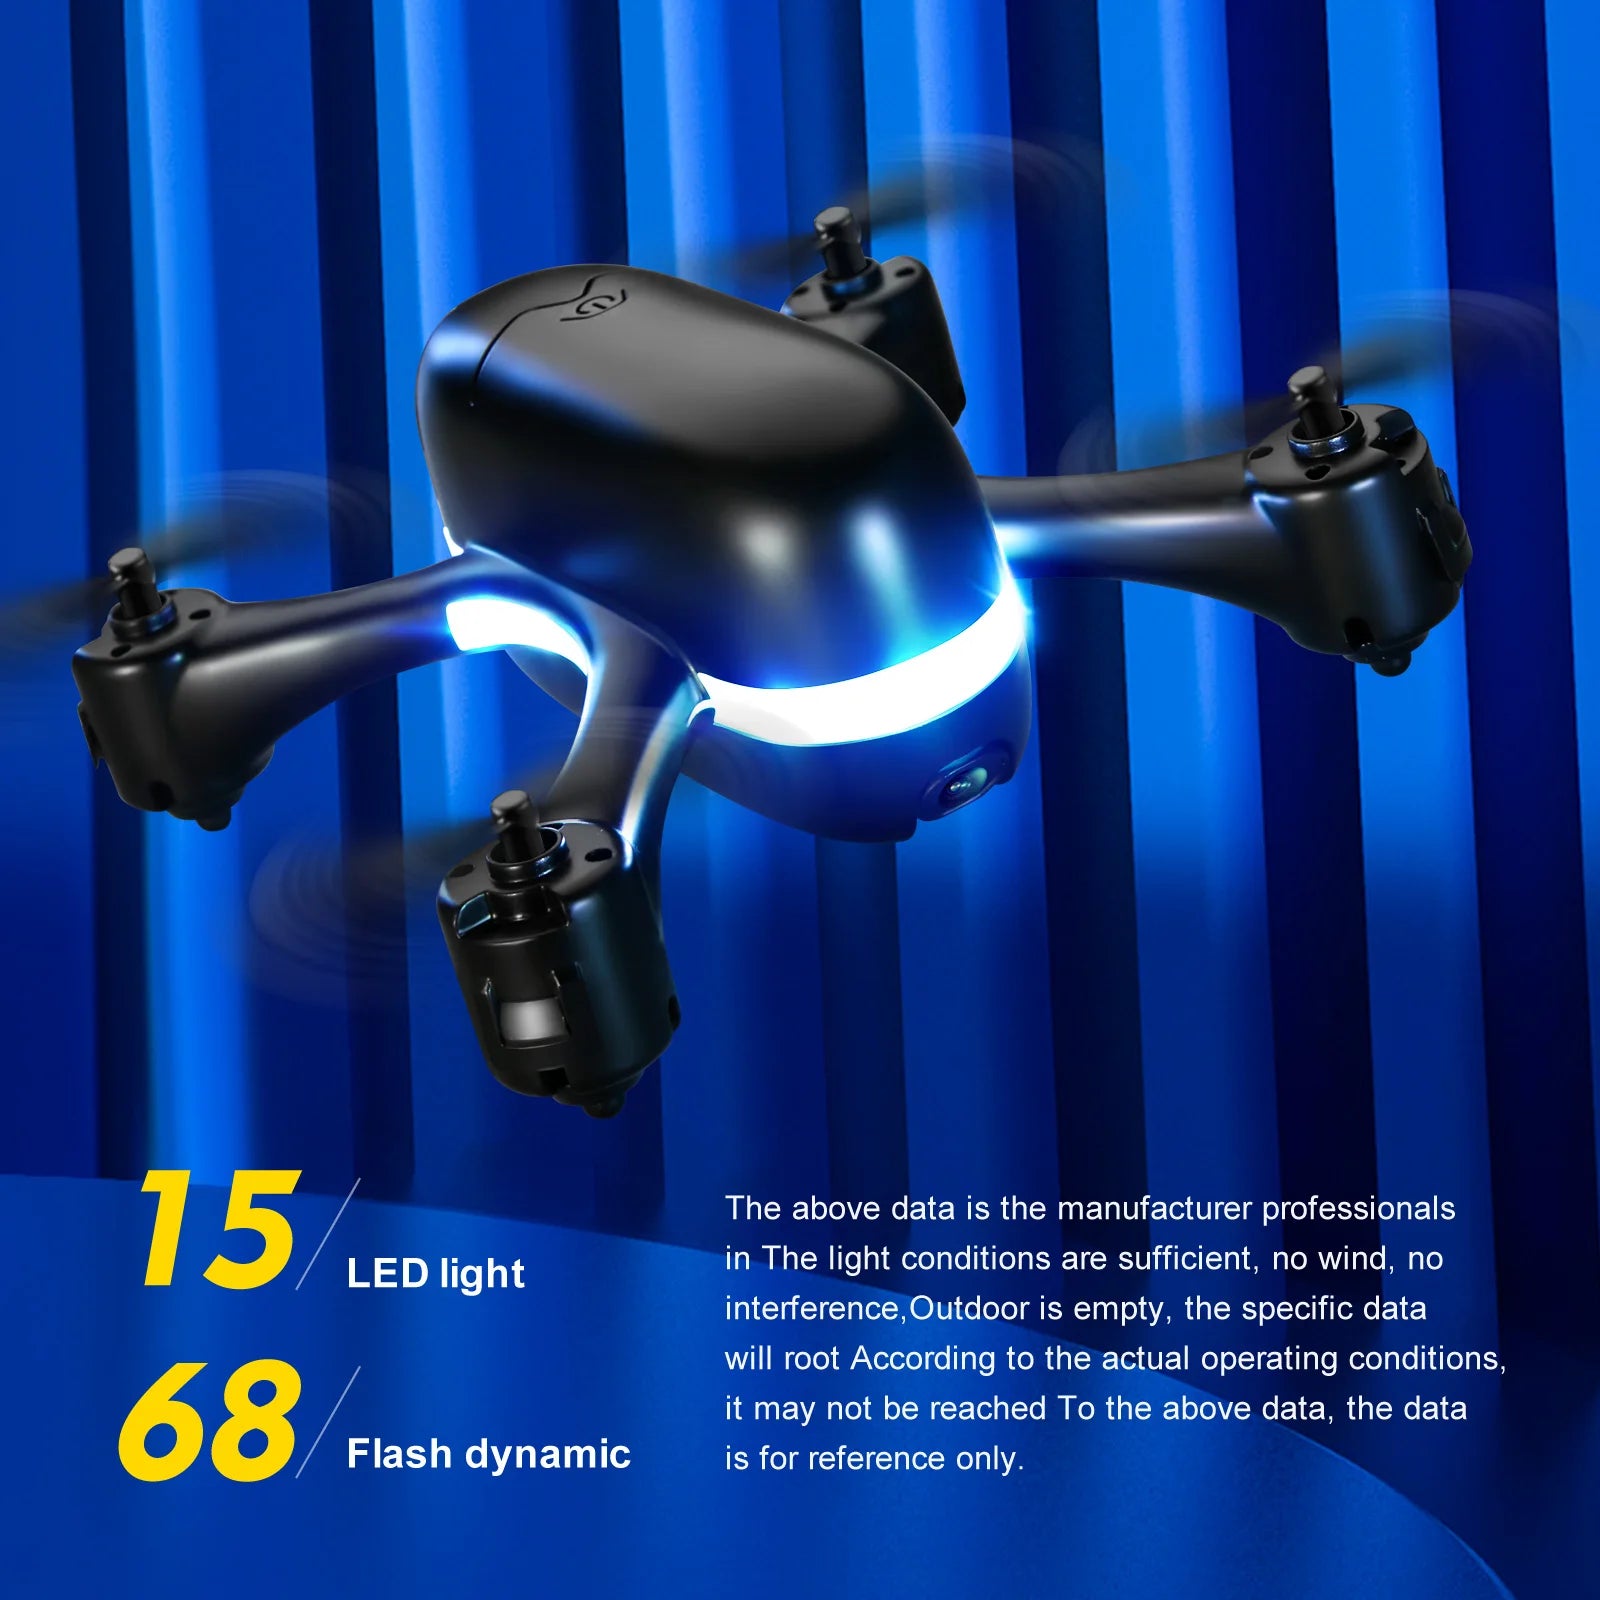 S88 Drone, 0 the above data is the manufacturer professionals 15 led light in the